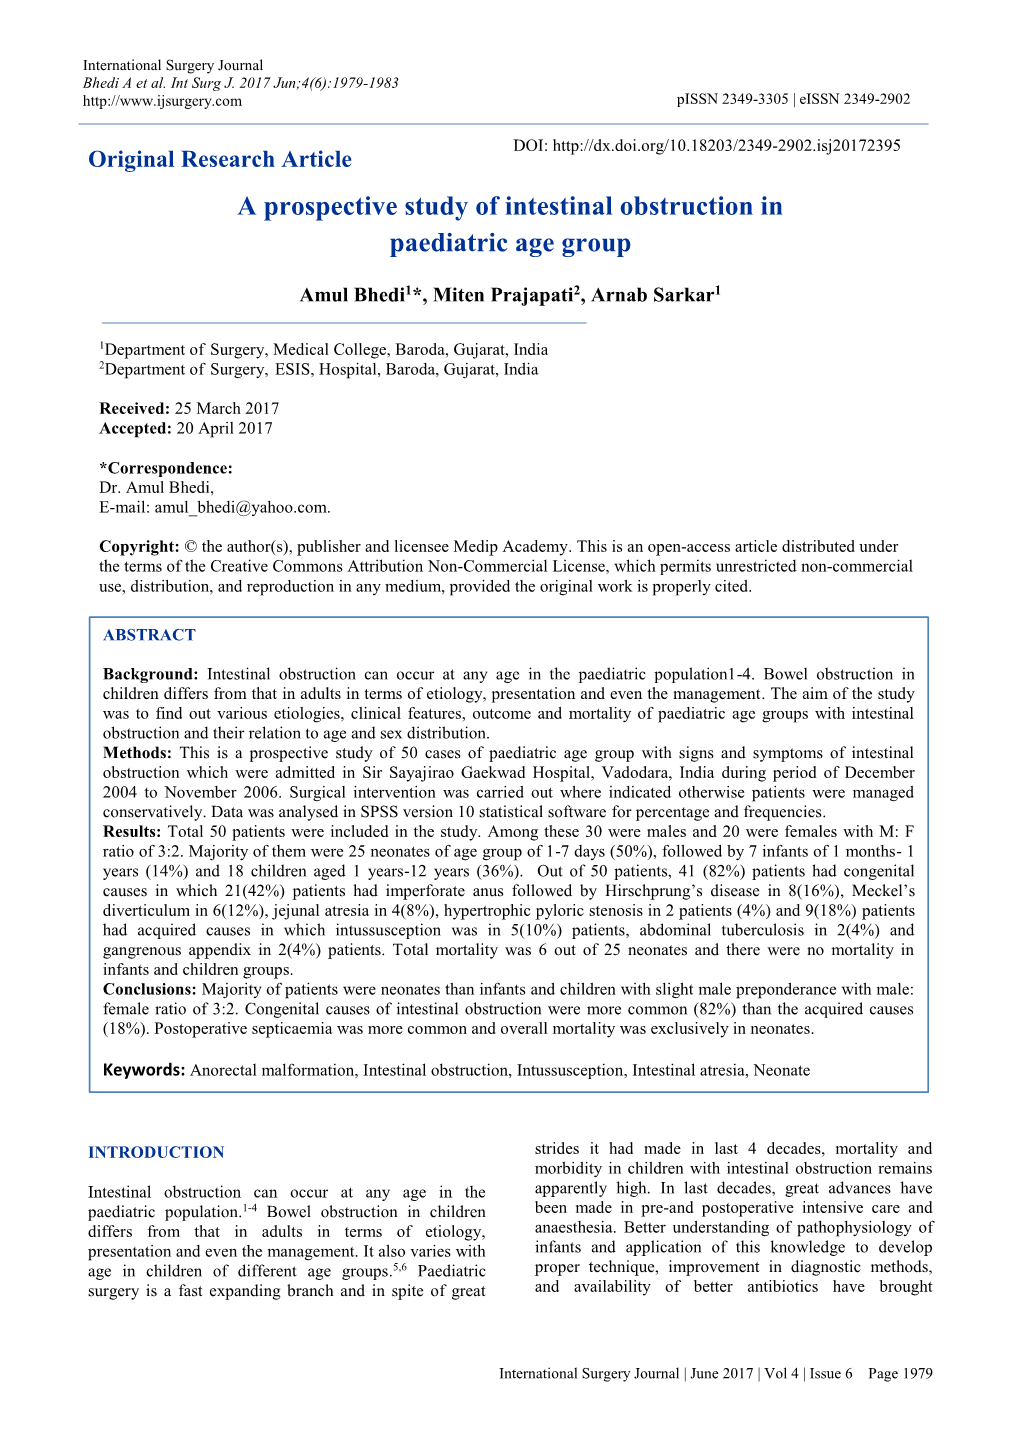 A Prospective Study of Intestinal Obstruction in Paediatric Age Group